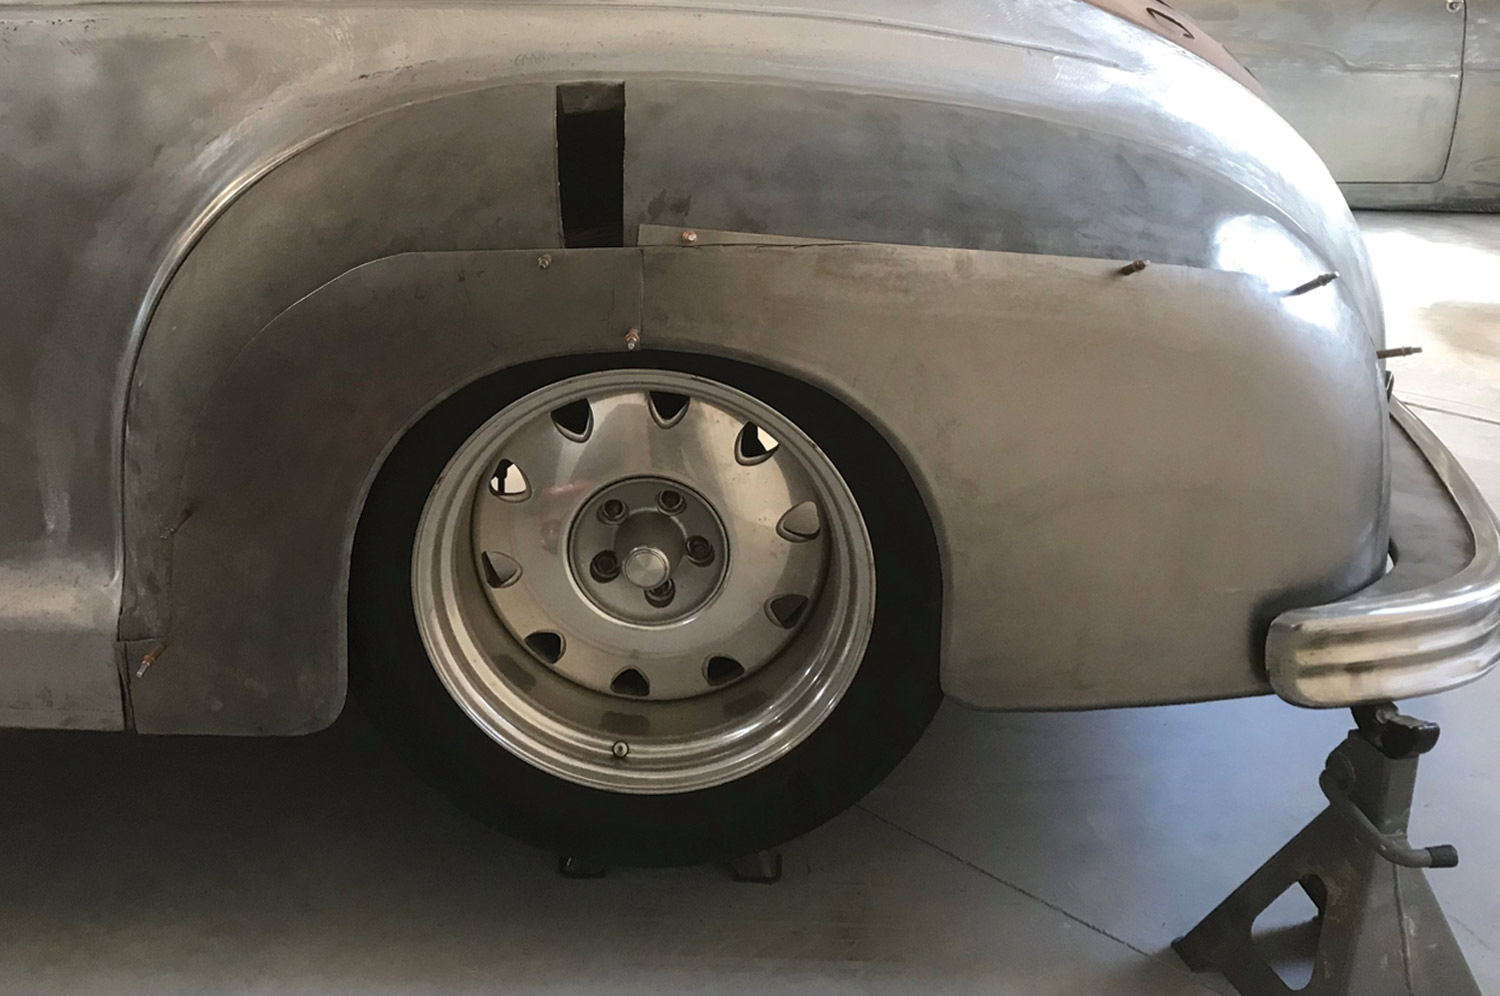 the ’49 Plymouth bumper and hand-formed splash pan are test-fit